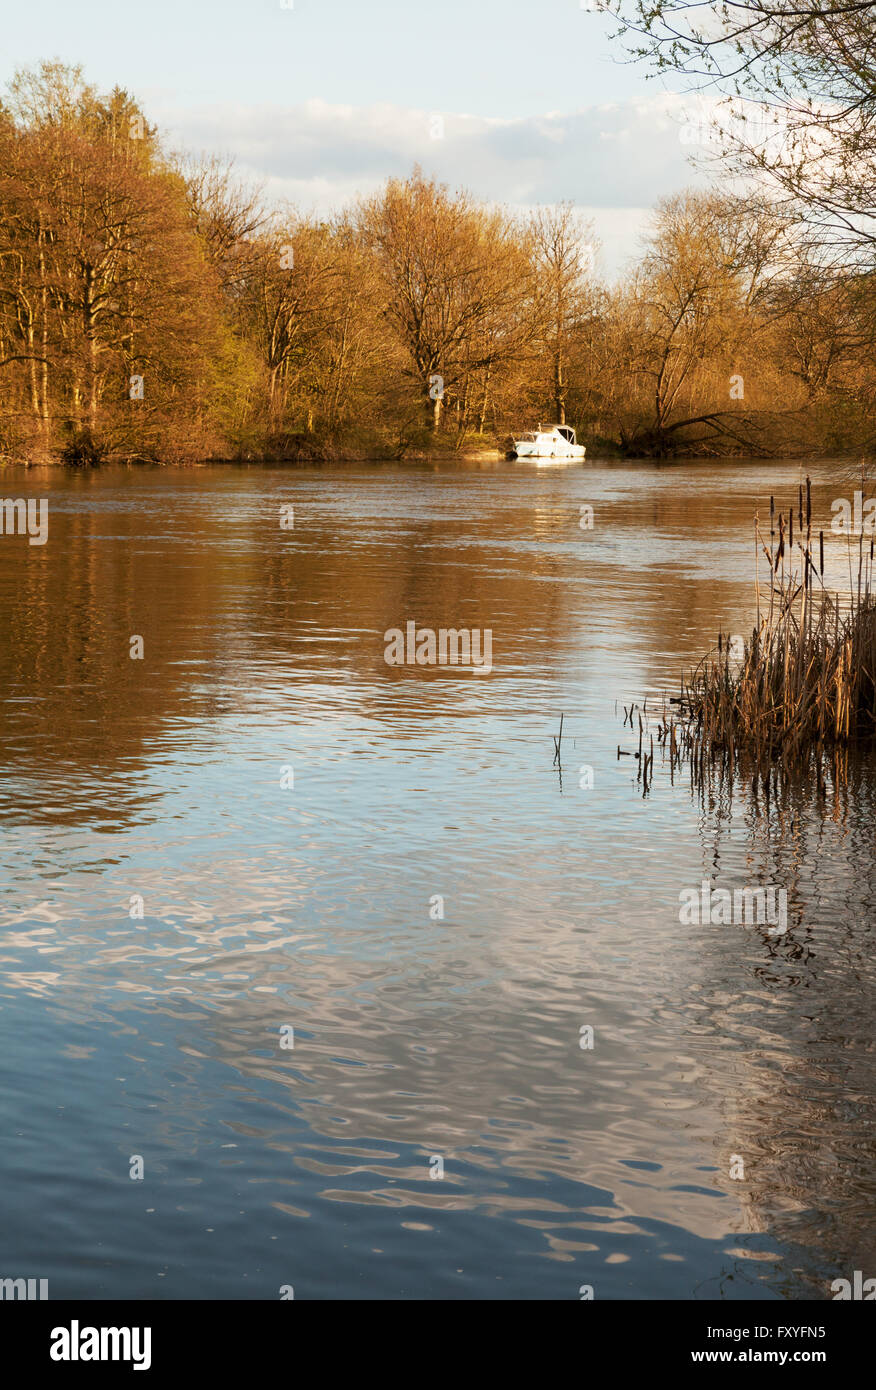 Peaceful english countryside scene on the River Thames at Wallingford, Oxfordshire England UK Stock Photo